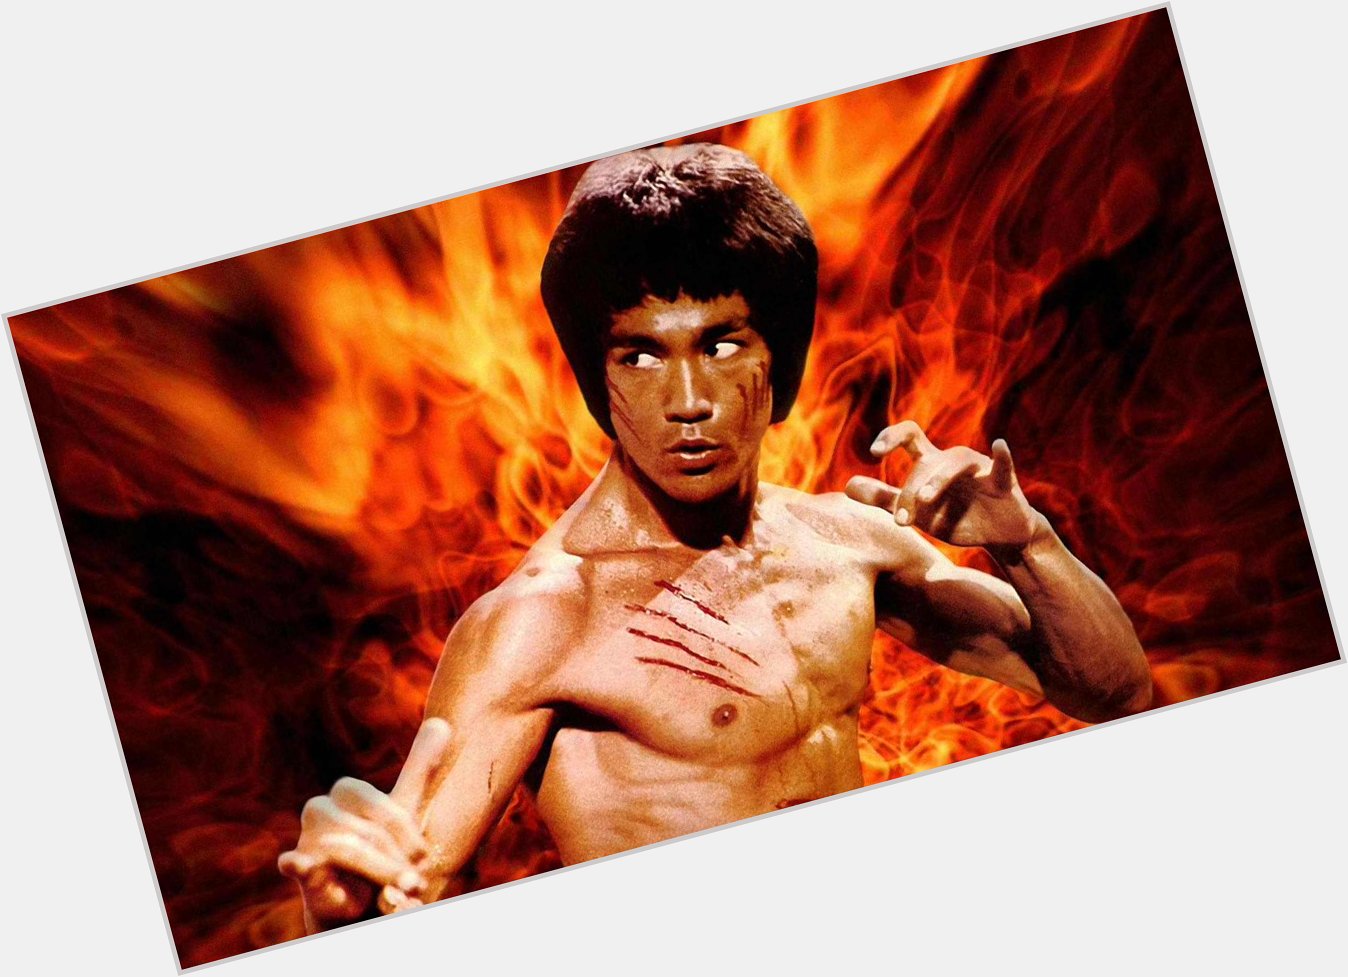 Celebrating the Life and Legacy of Bruce Lee, a Man of Eternal Inspiration
Happy 75th Birthday  